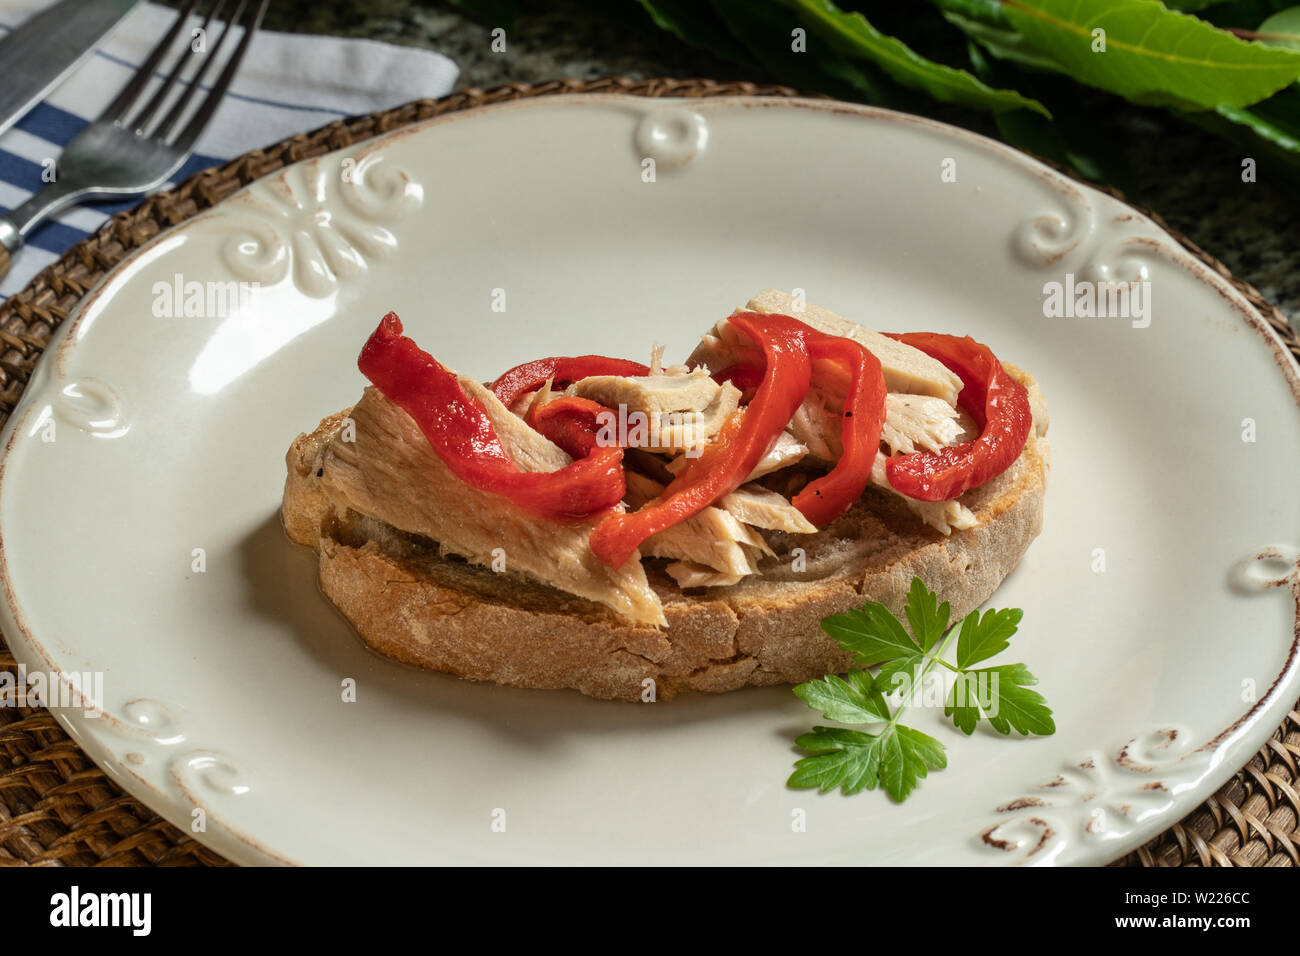 Tasty open sandwich or toast with tuna and red peppers on plate. Mediterranean cuisine Stock Photo